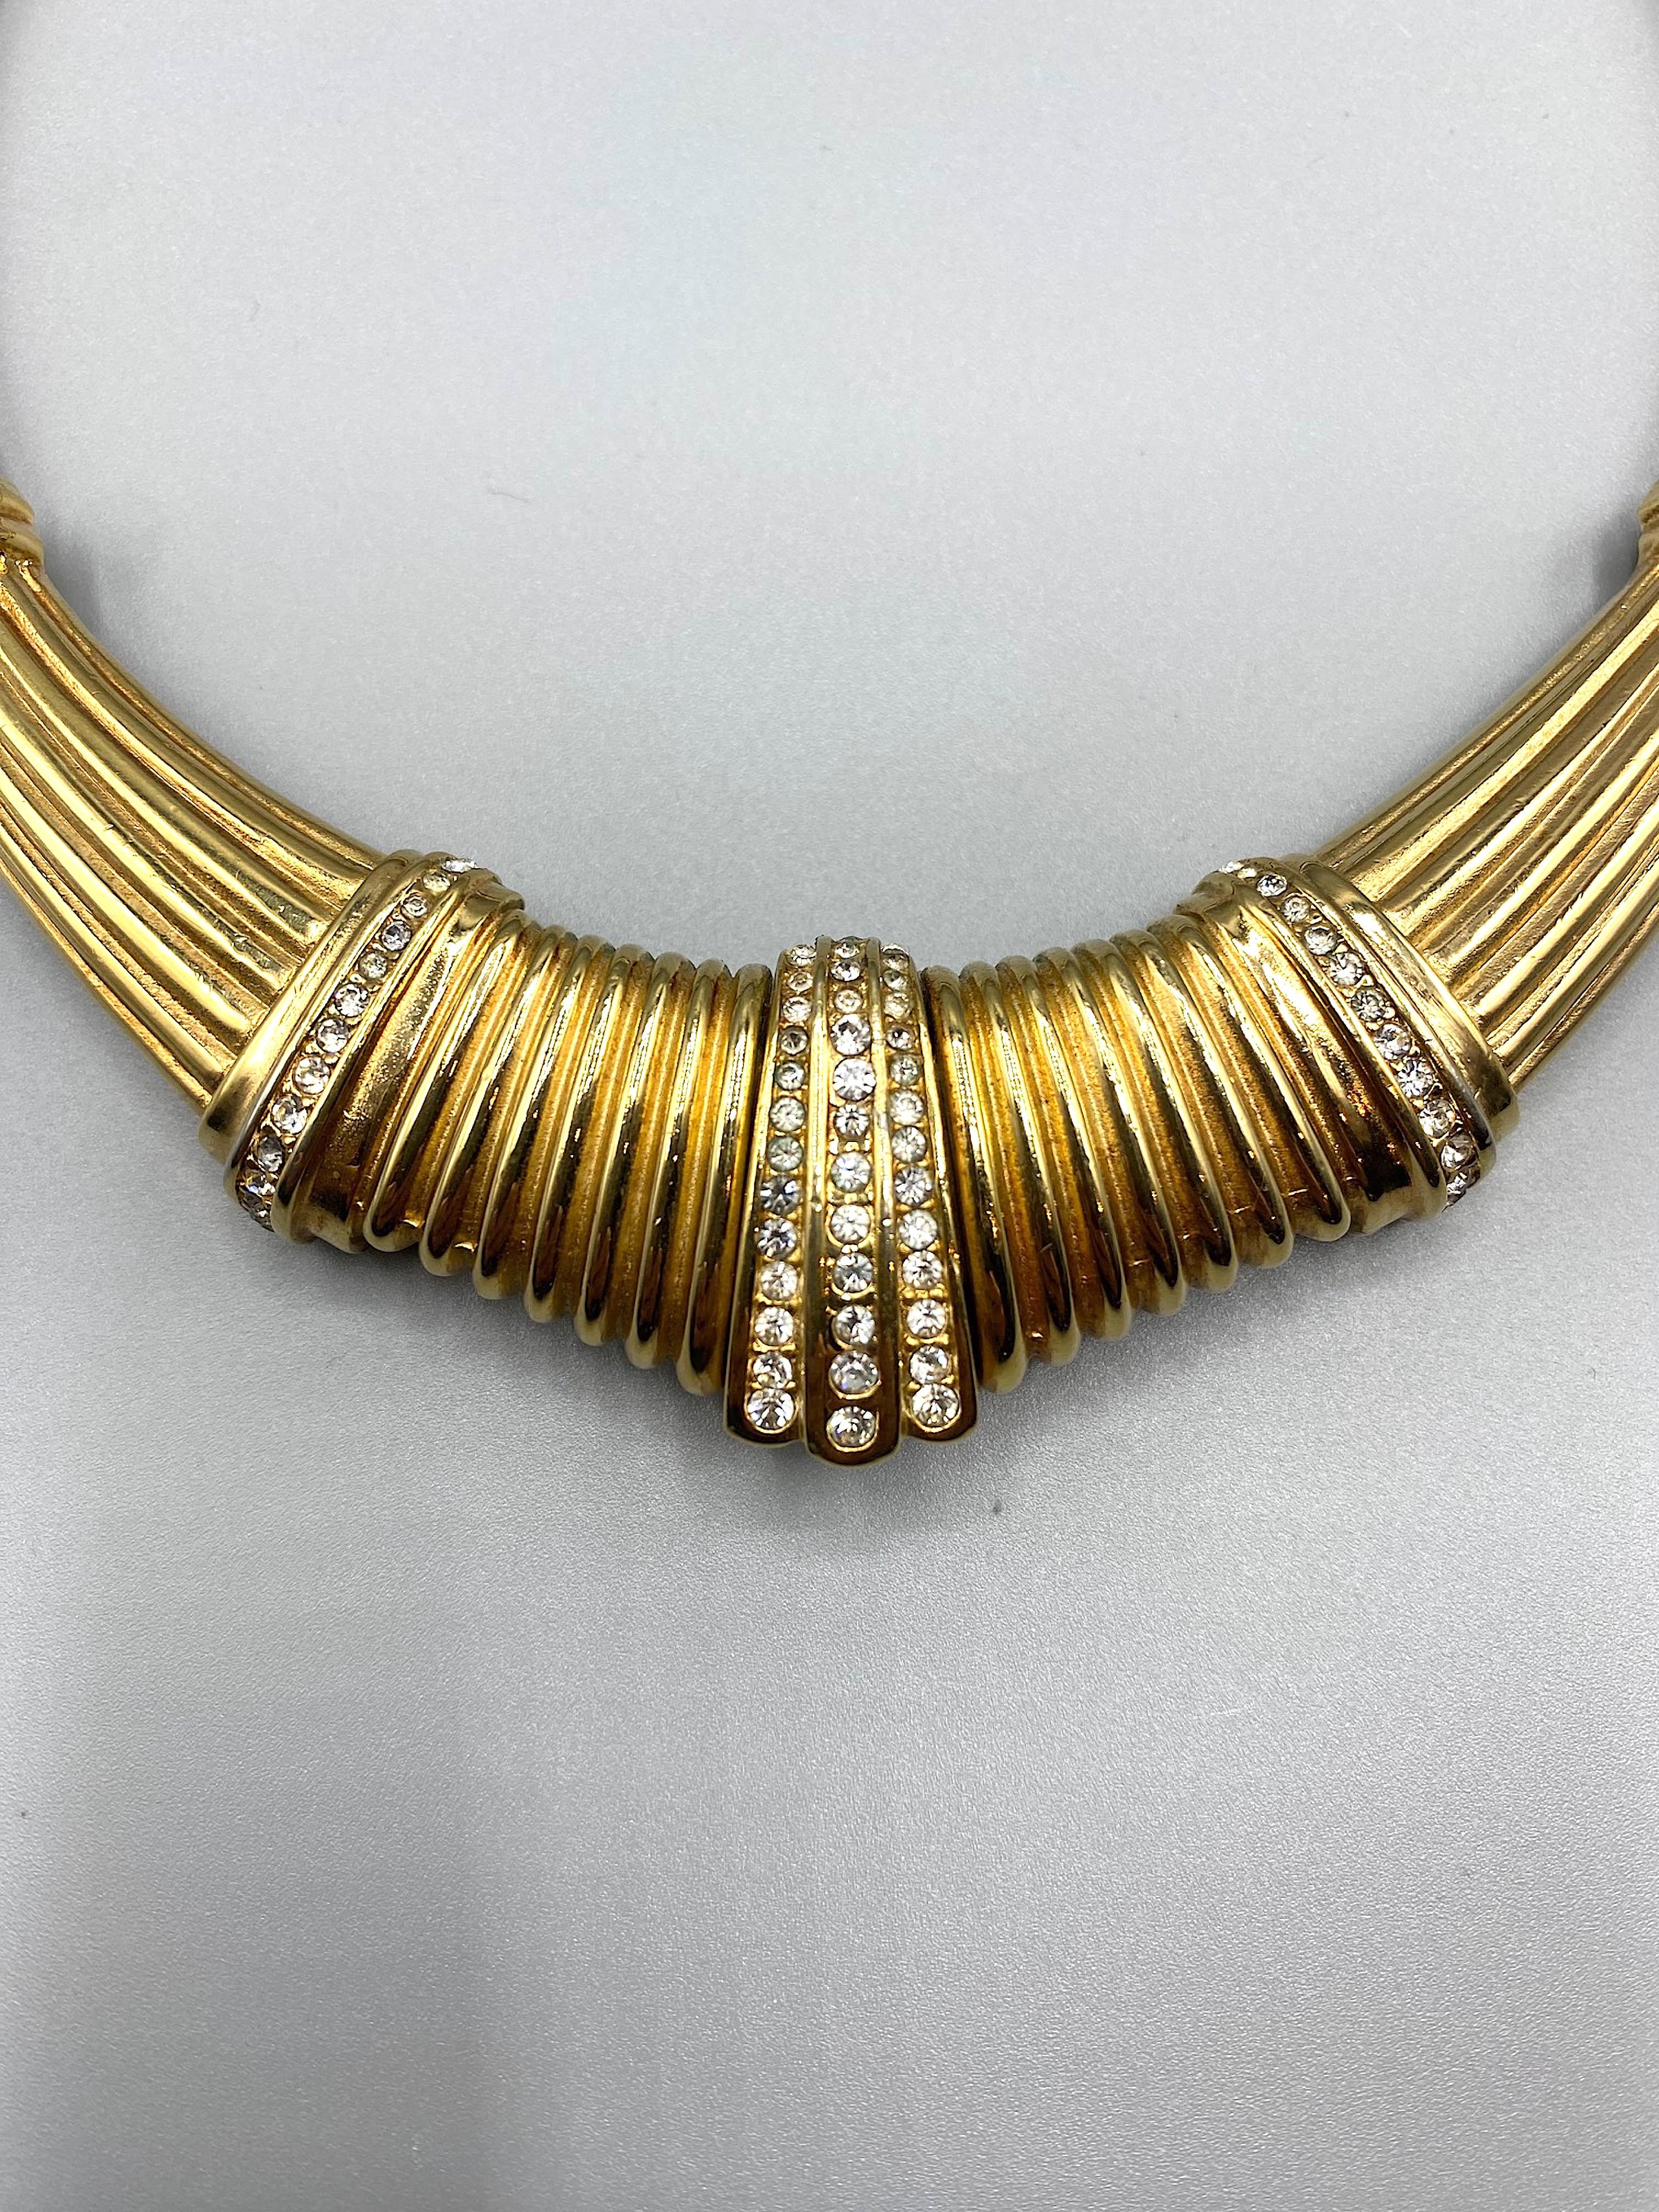 Magnificent Christian Dior  1980's Art Deco Style, Gold with rhinstone Omega necklace, with a rigid geometrical center.
Heavy gold plate.
The rigid gold center with rhinstones measures 5